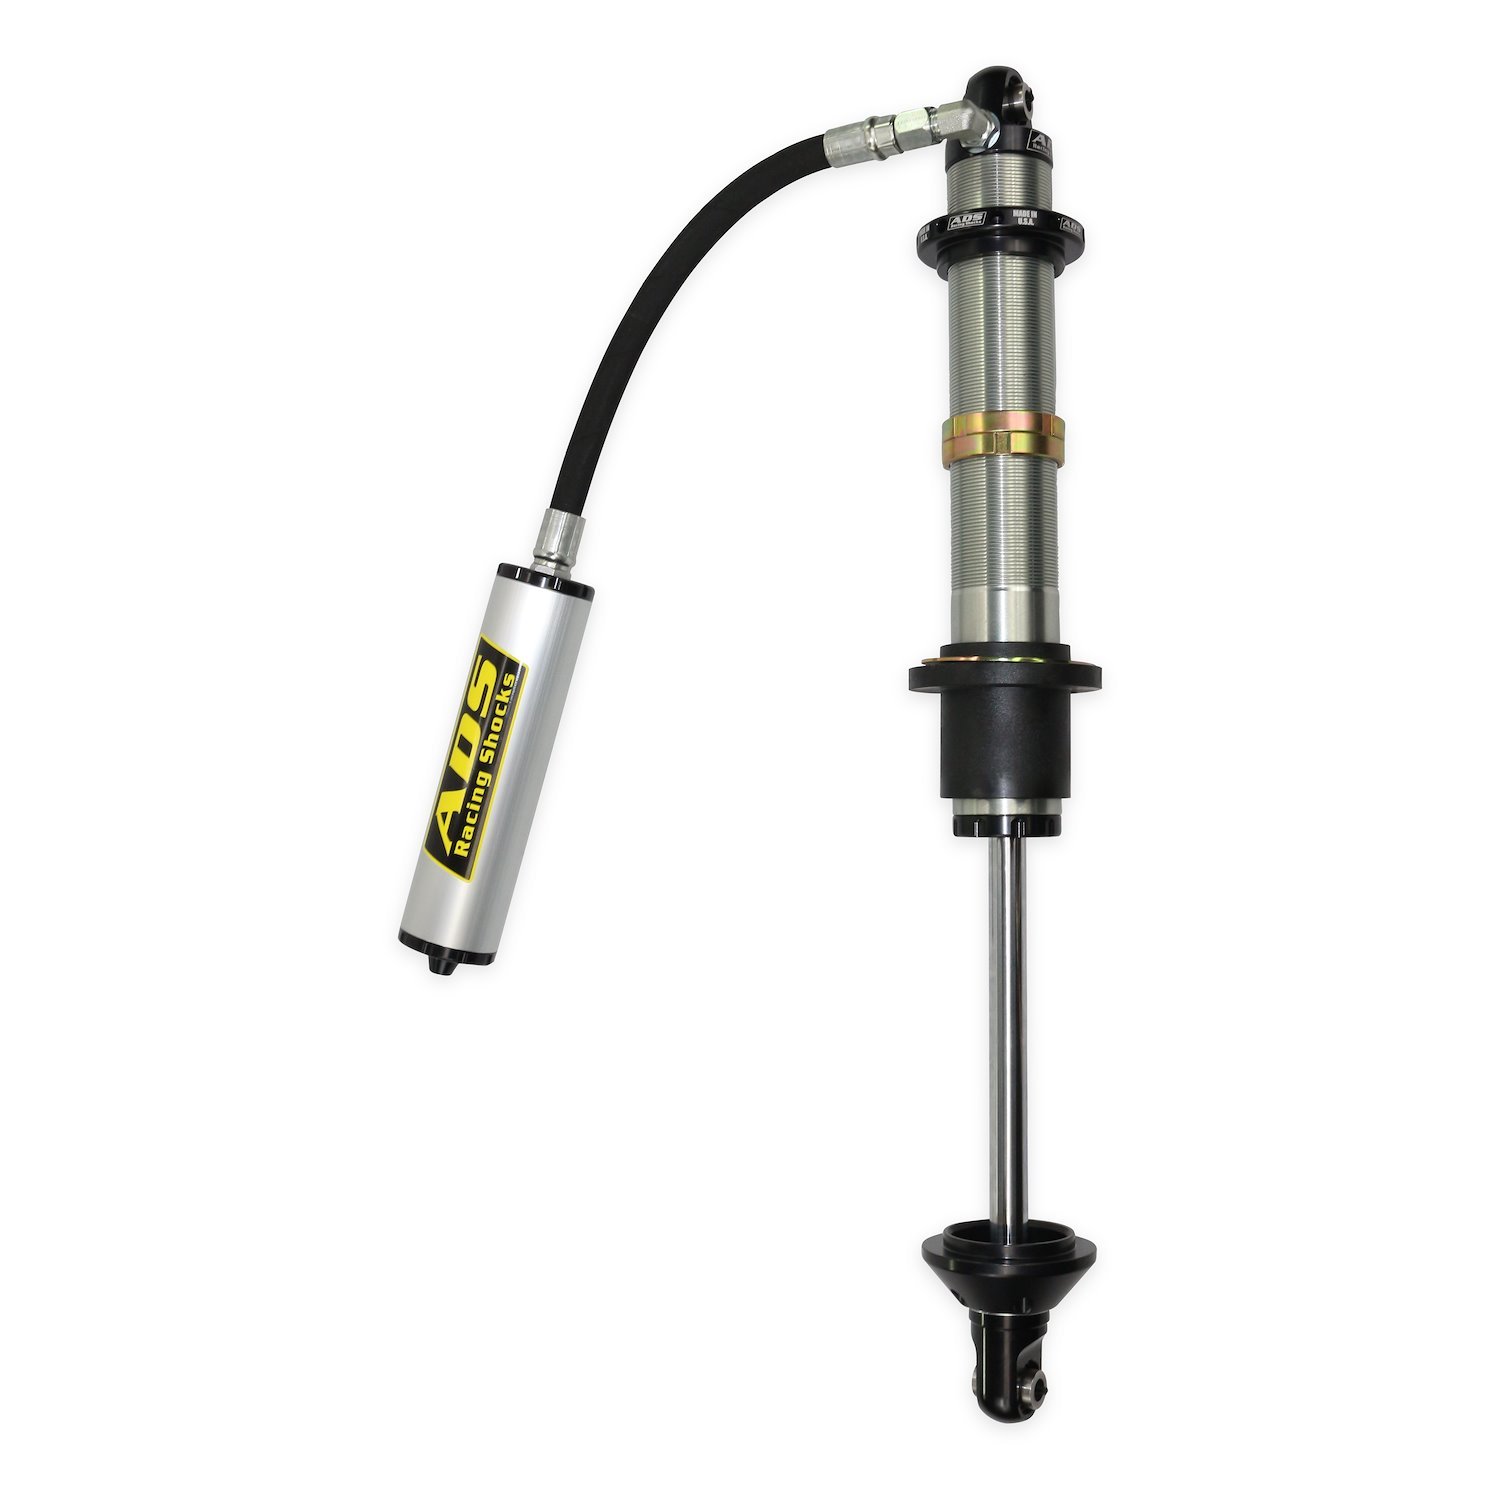 250-COR18-A90 Coil-Over Race Shock, 2.5 in. x 18 in. Stroke, w/ Remote Reservoir (90-Degree Hose), w/ Compression Adjustment